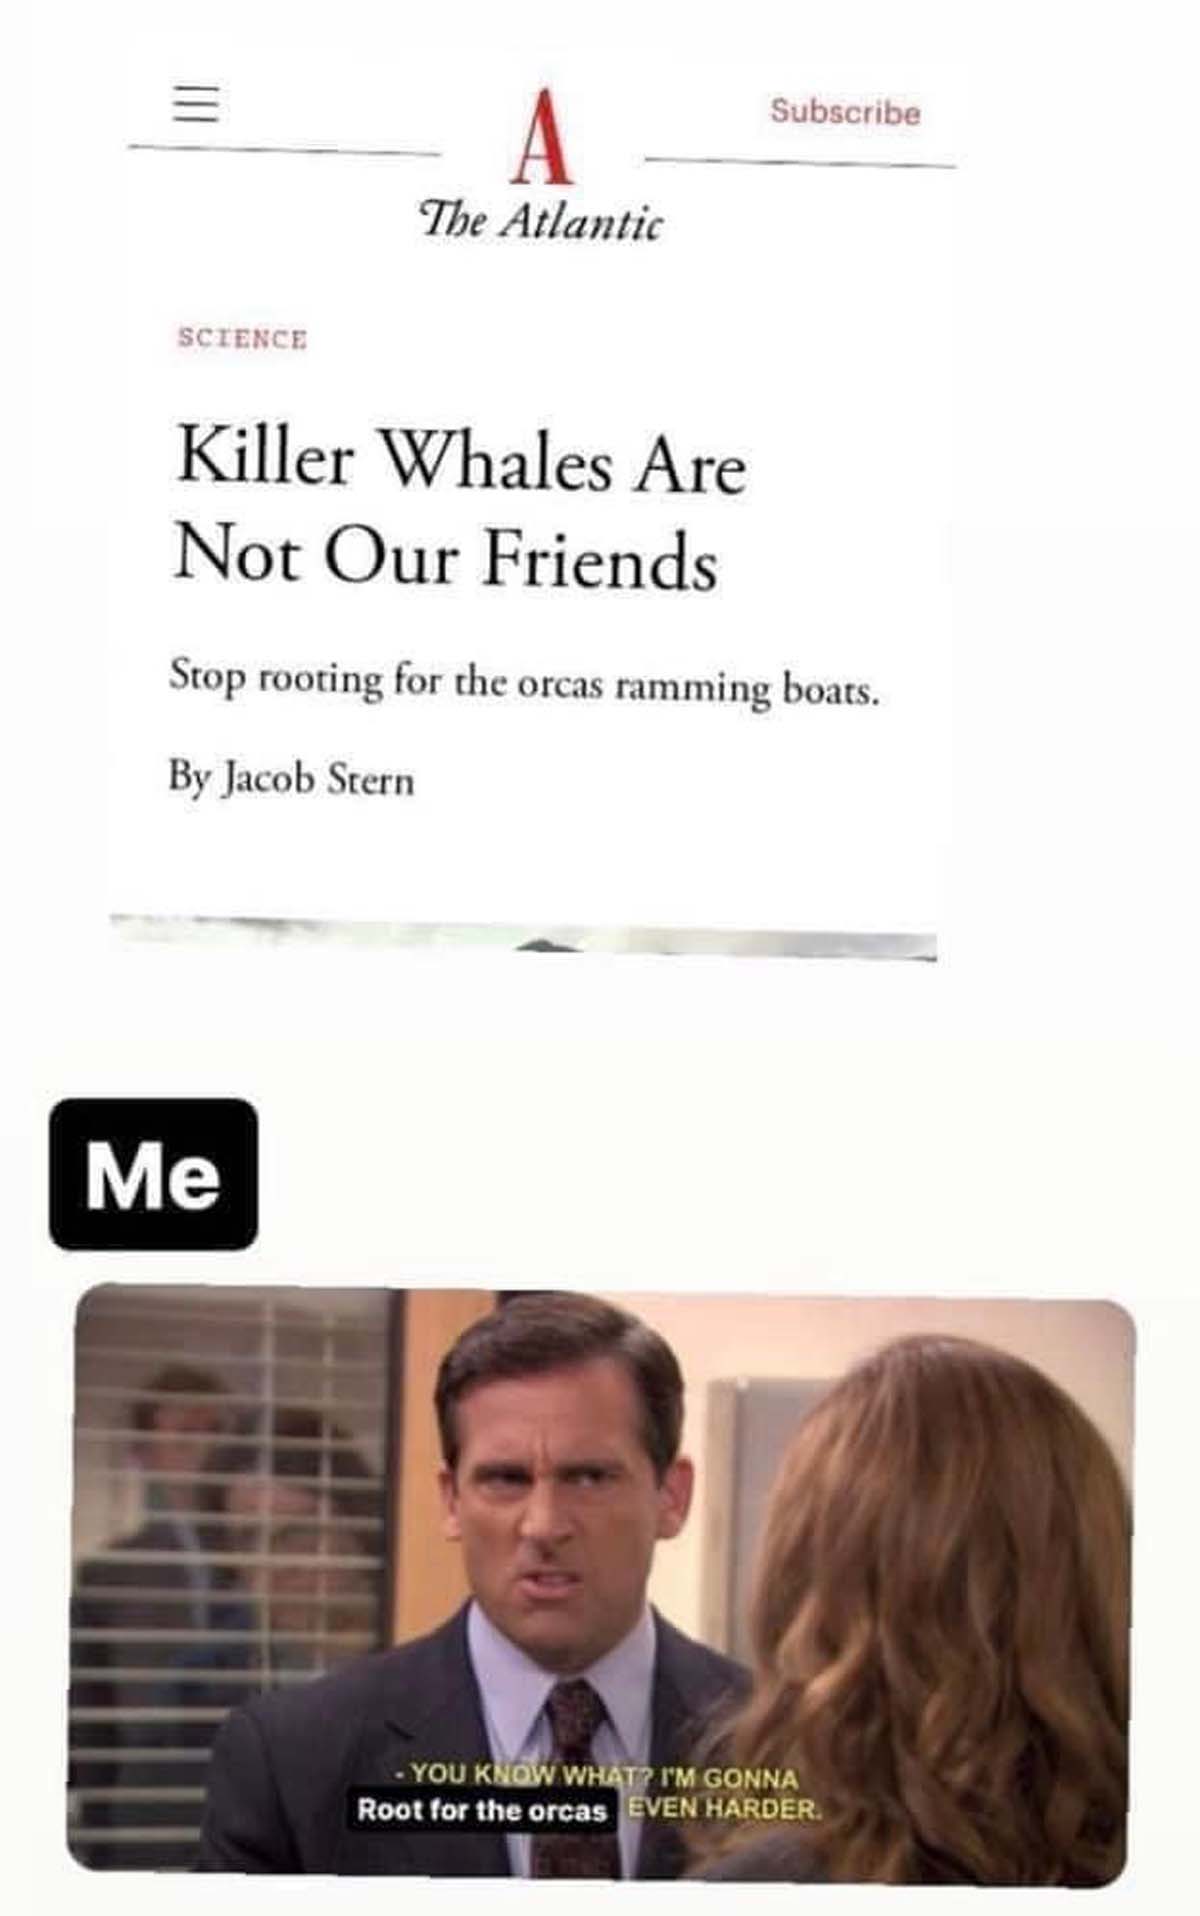 i m gonna start dating her even harder - Science A The Atlantic Subscribe Killer Whales Are Not Our Friends Stop rooting for the orcas ramming boats. By Jacob Stern Me You Know What? I'M Gonna Root for the orcas Even Harder.